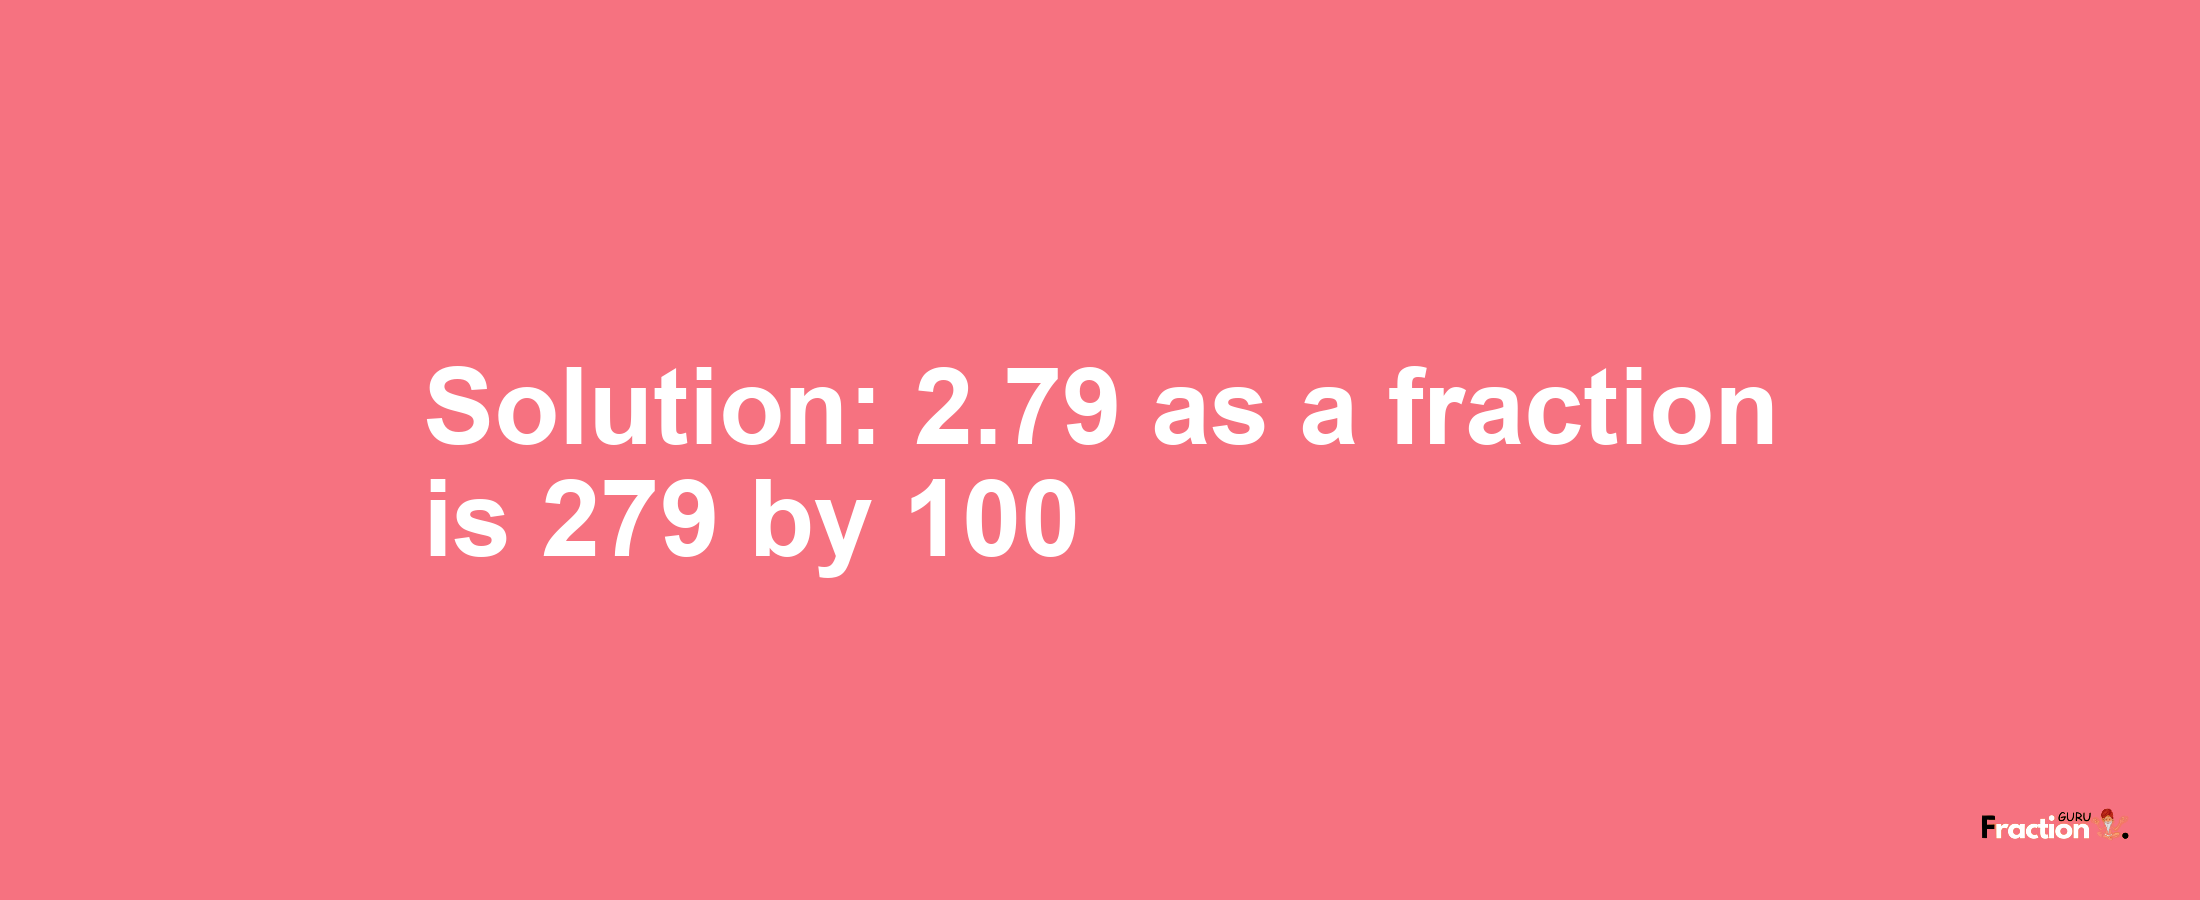 Solution:2.79 as a fraction is 279/100